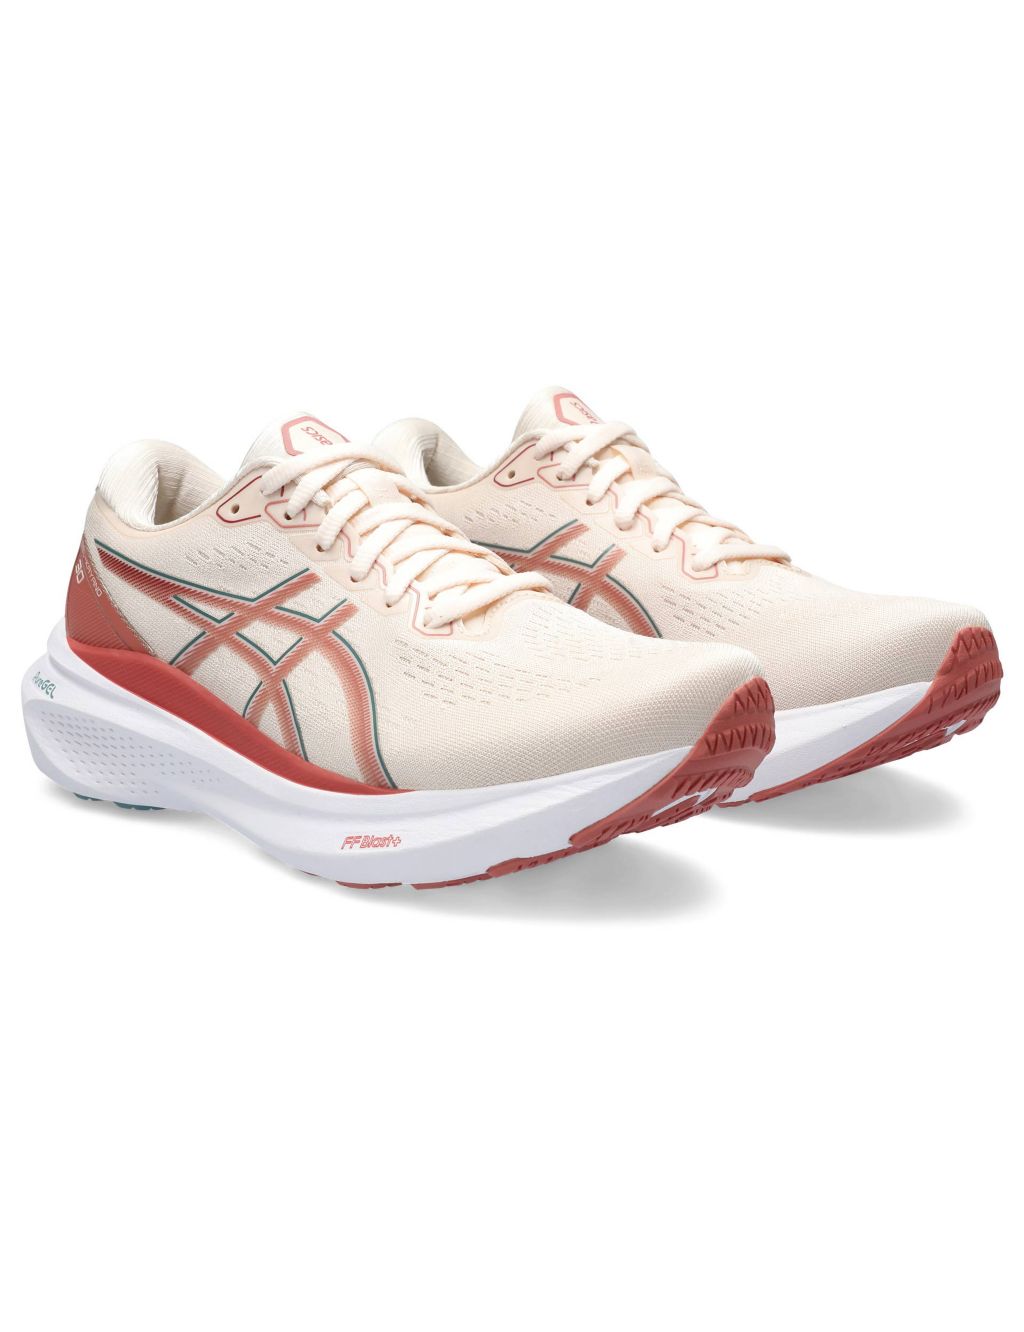 Gel-Kayano 30 Lace Up Trainers image 2